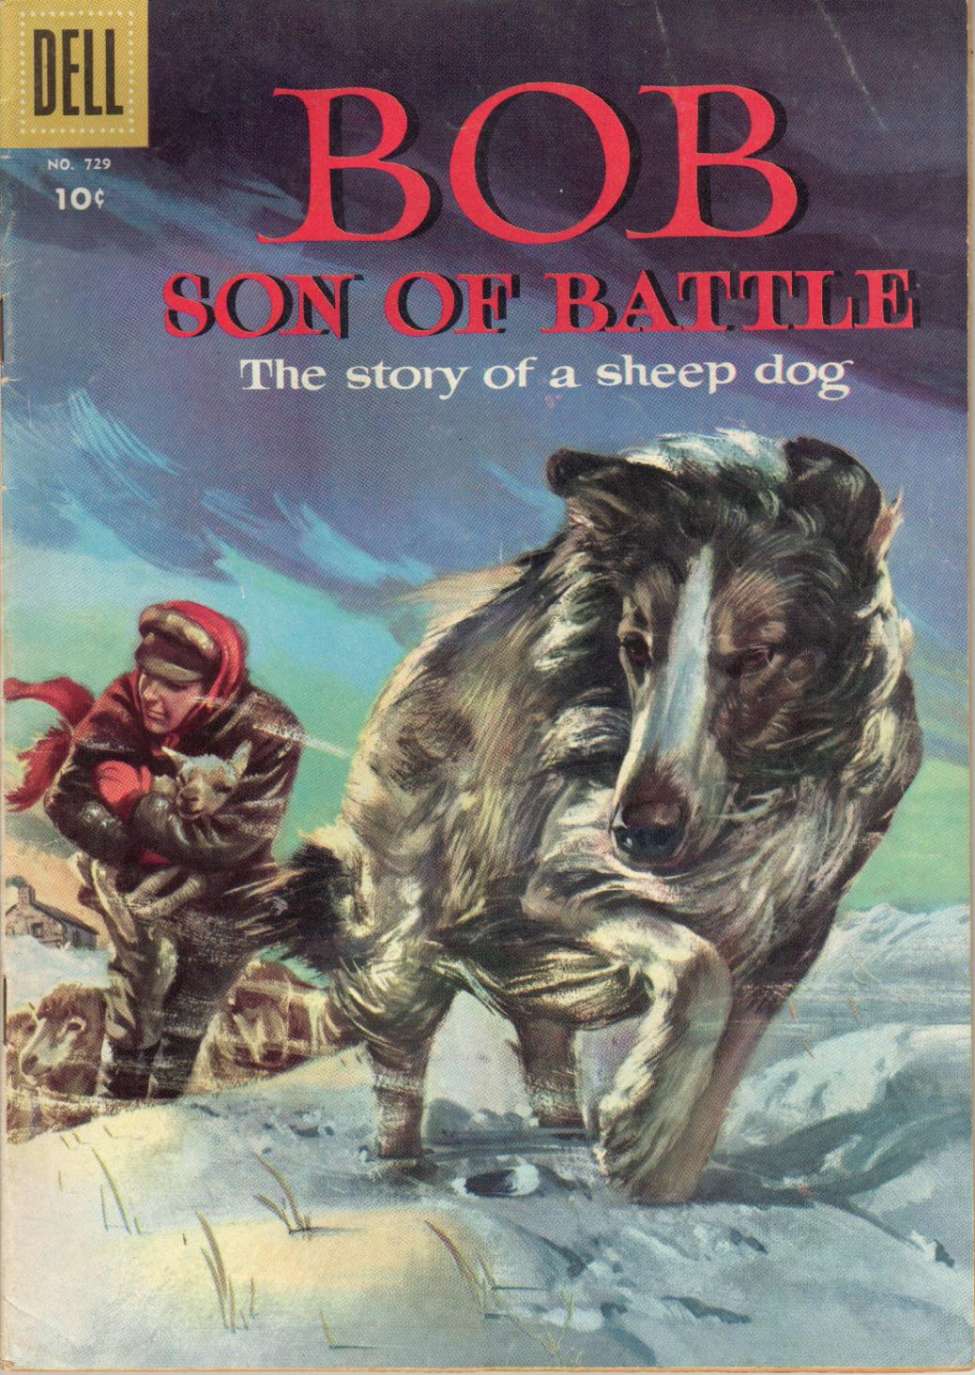 Book Cover For 0729 - Bob, Son of Battle